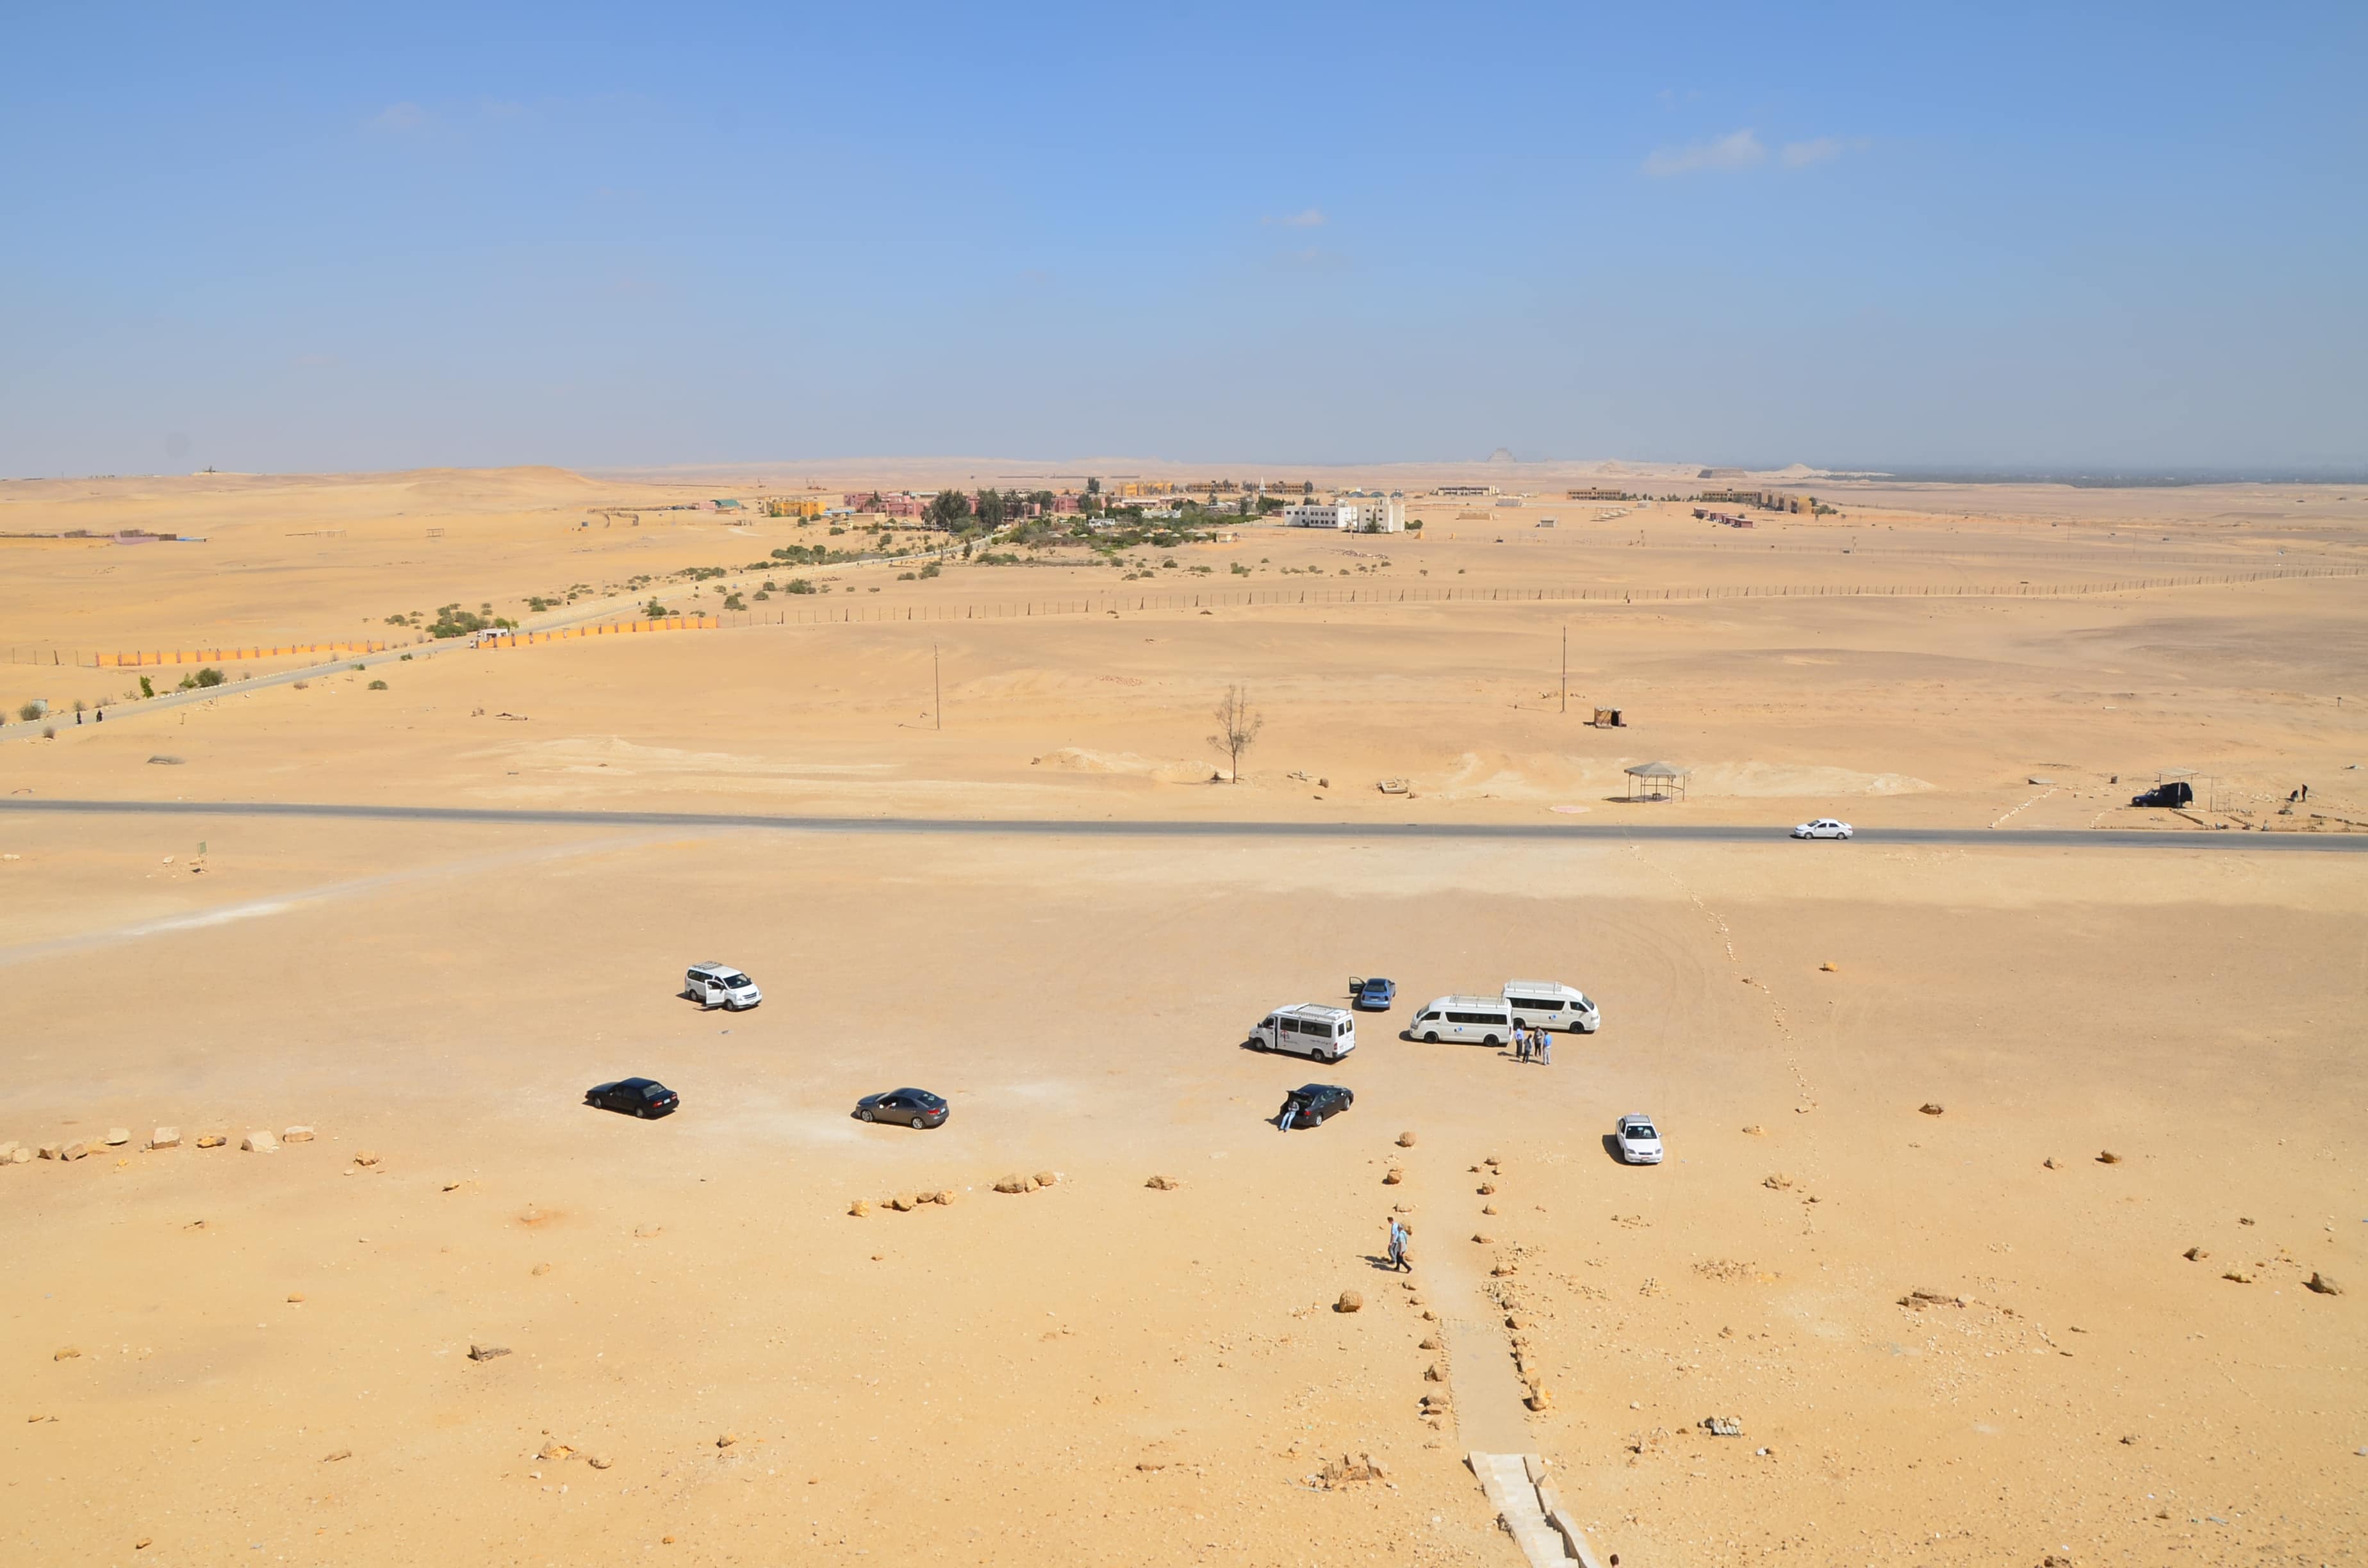 View from the Red Pyramid in Dahshur, Egypt